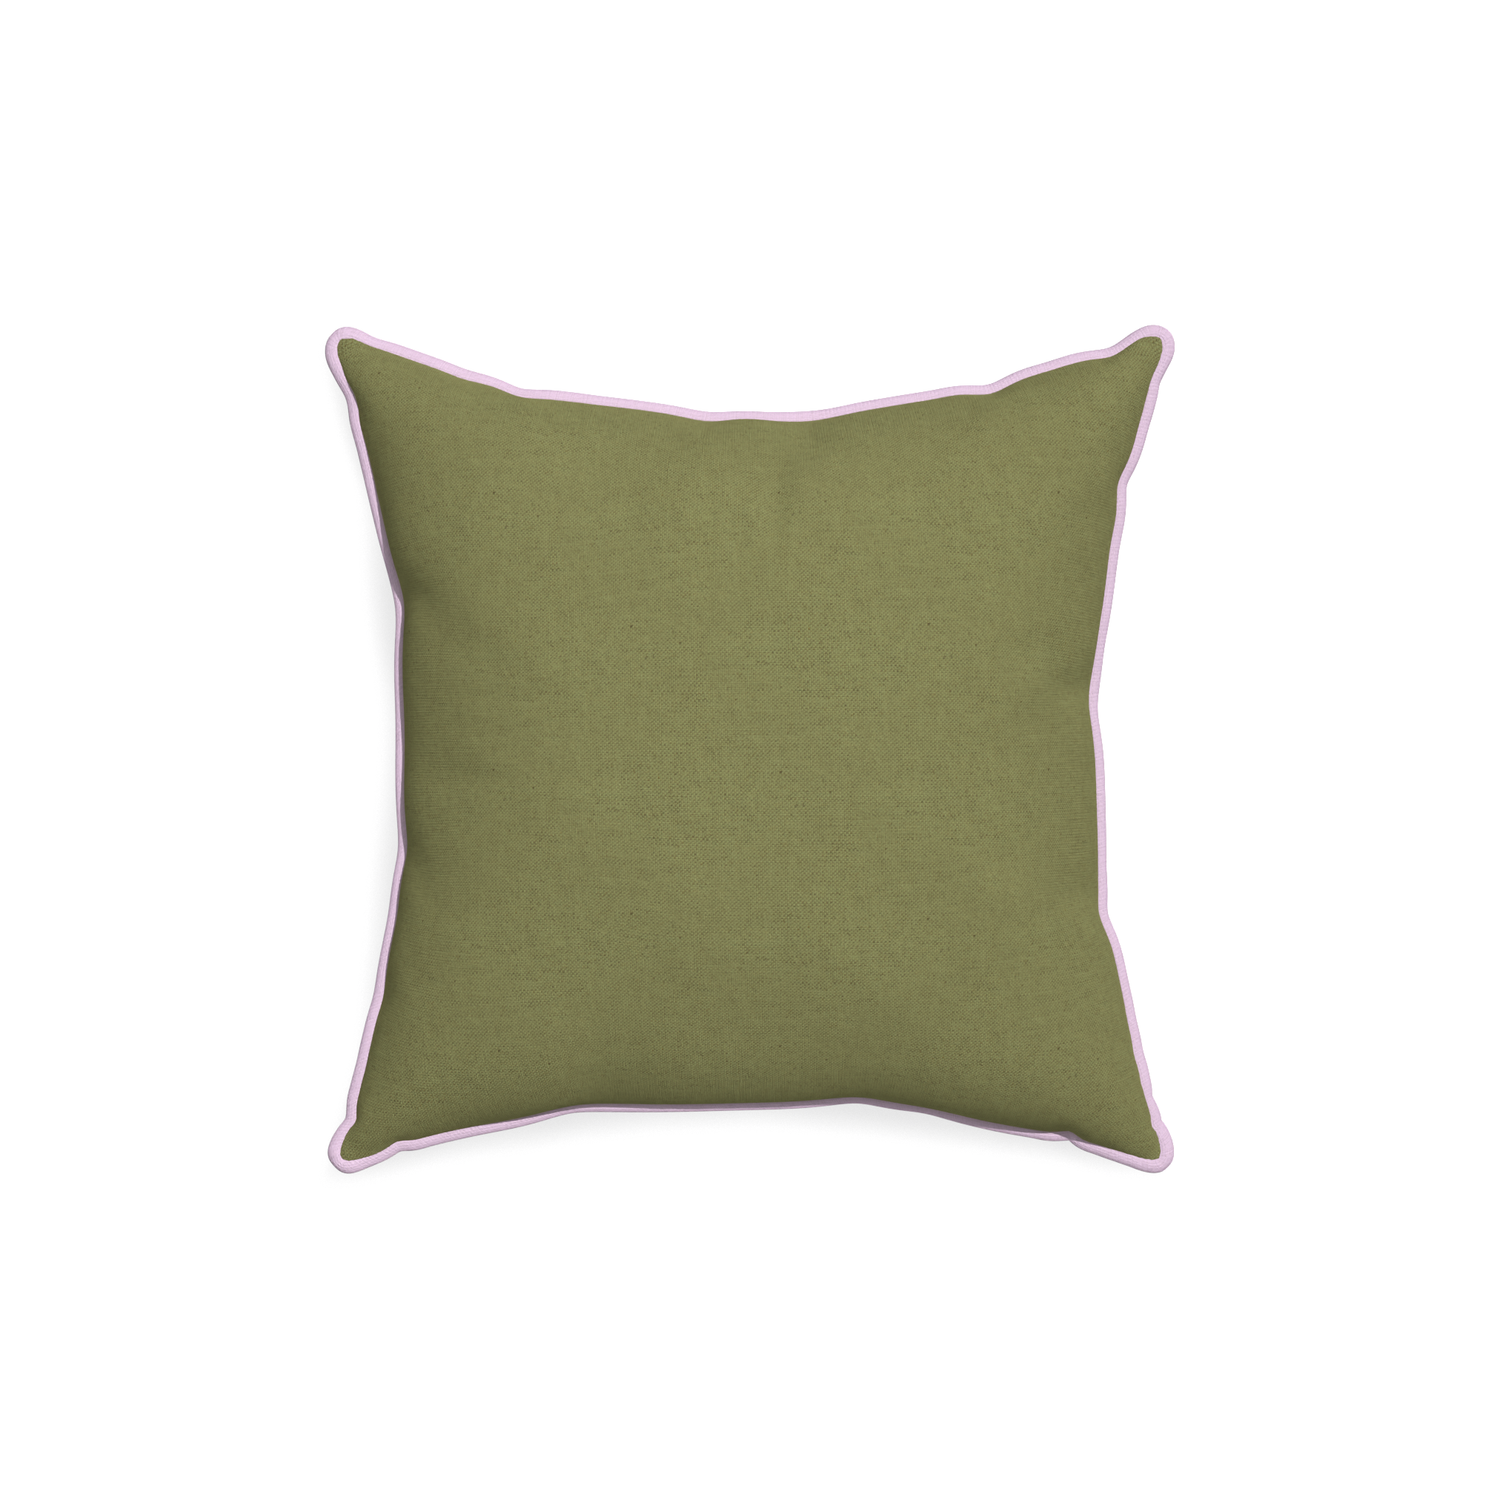 18-square moss custom moss greenpillow with l piping on white background